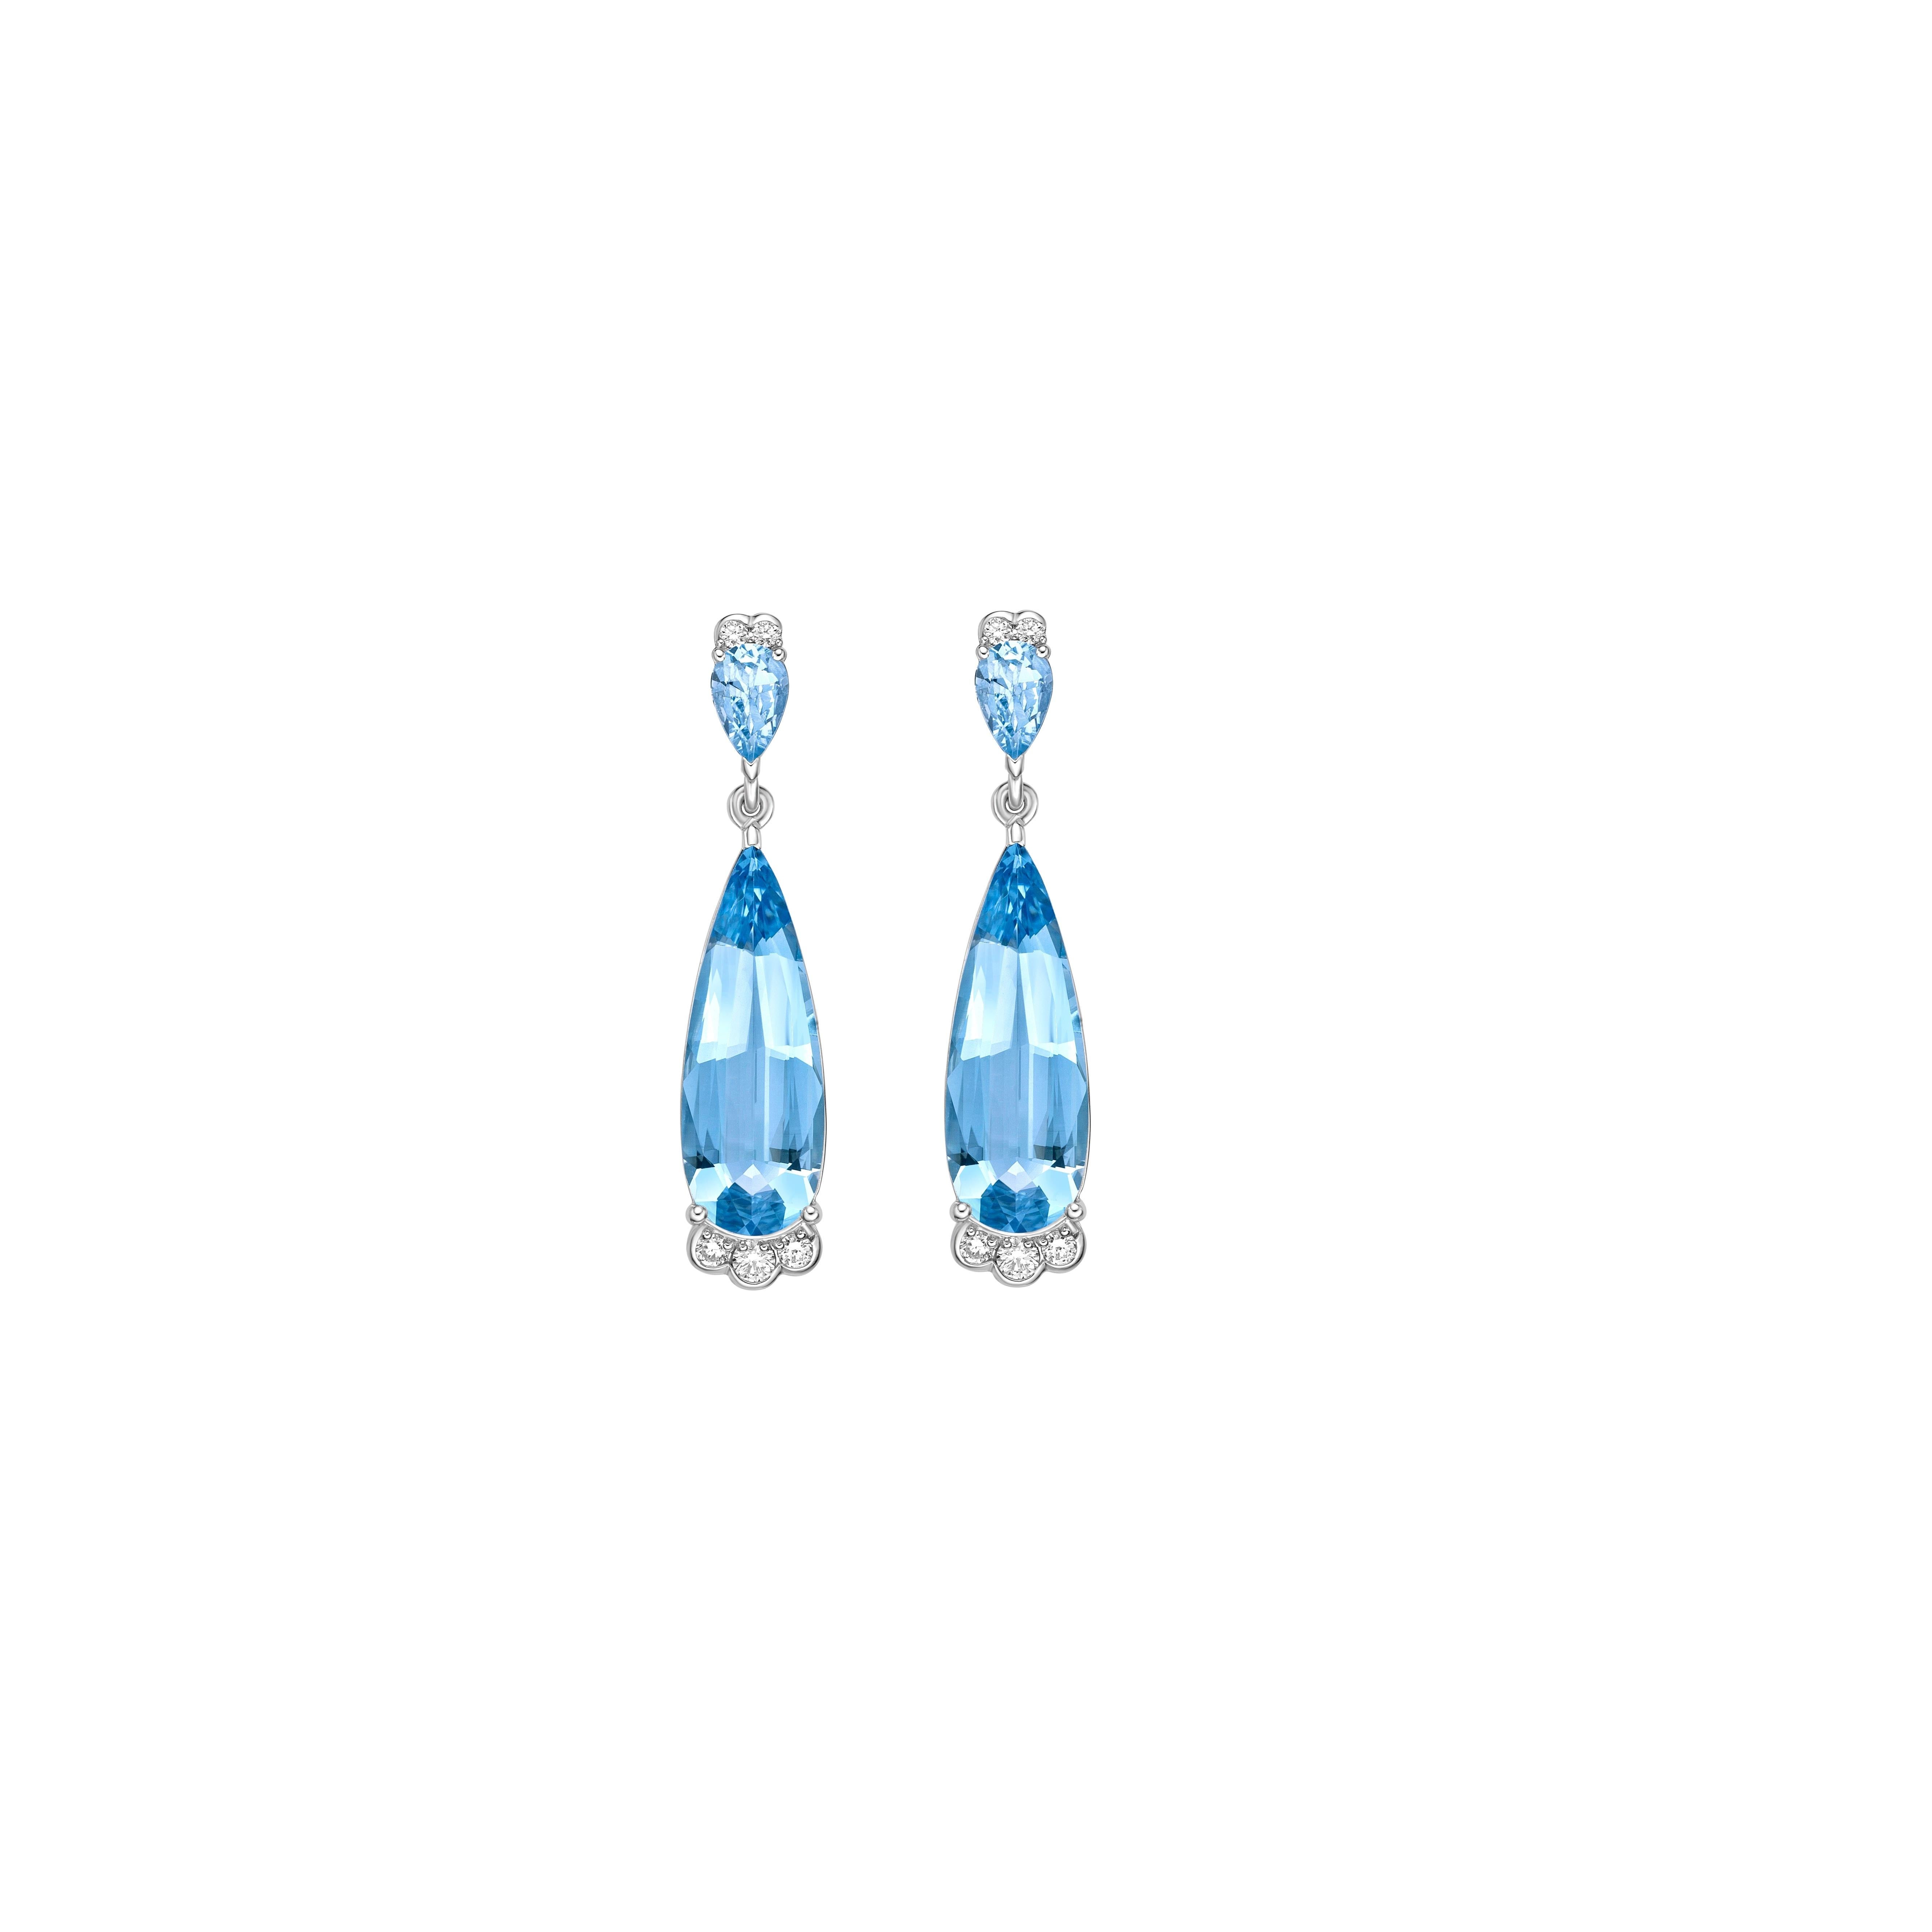 Contemporary 6.35 Carat Aquamarine Drop Dangle Earrings in 18KWG with White Diamond. For Sale